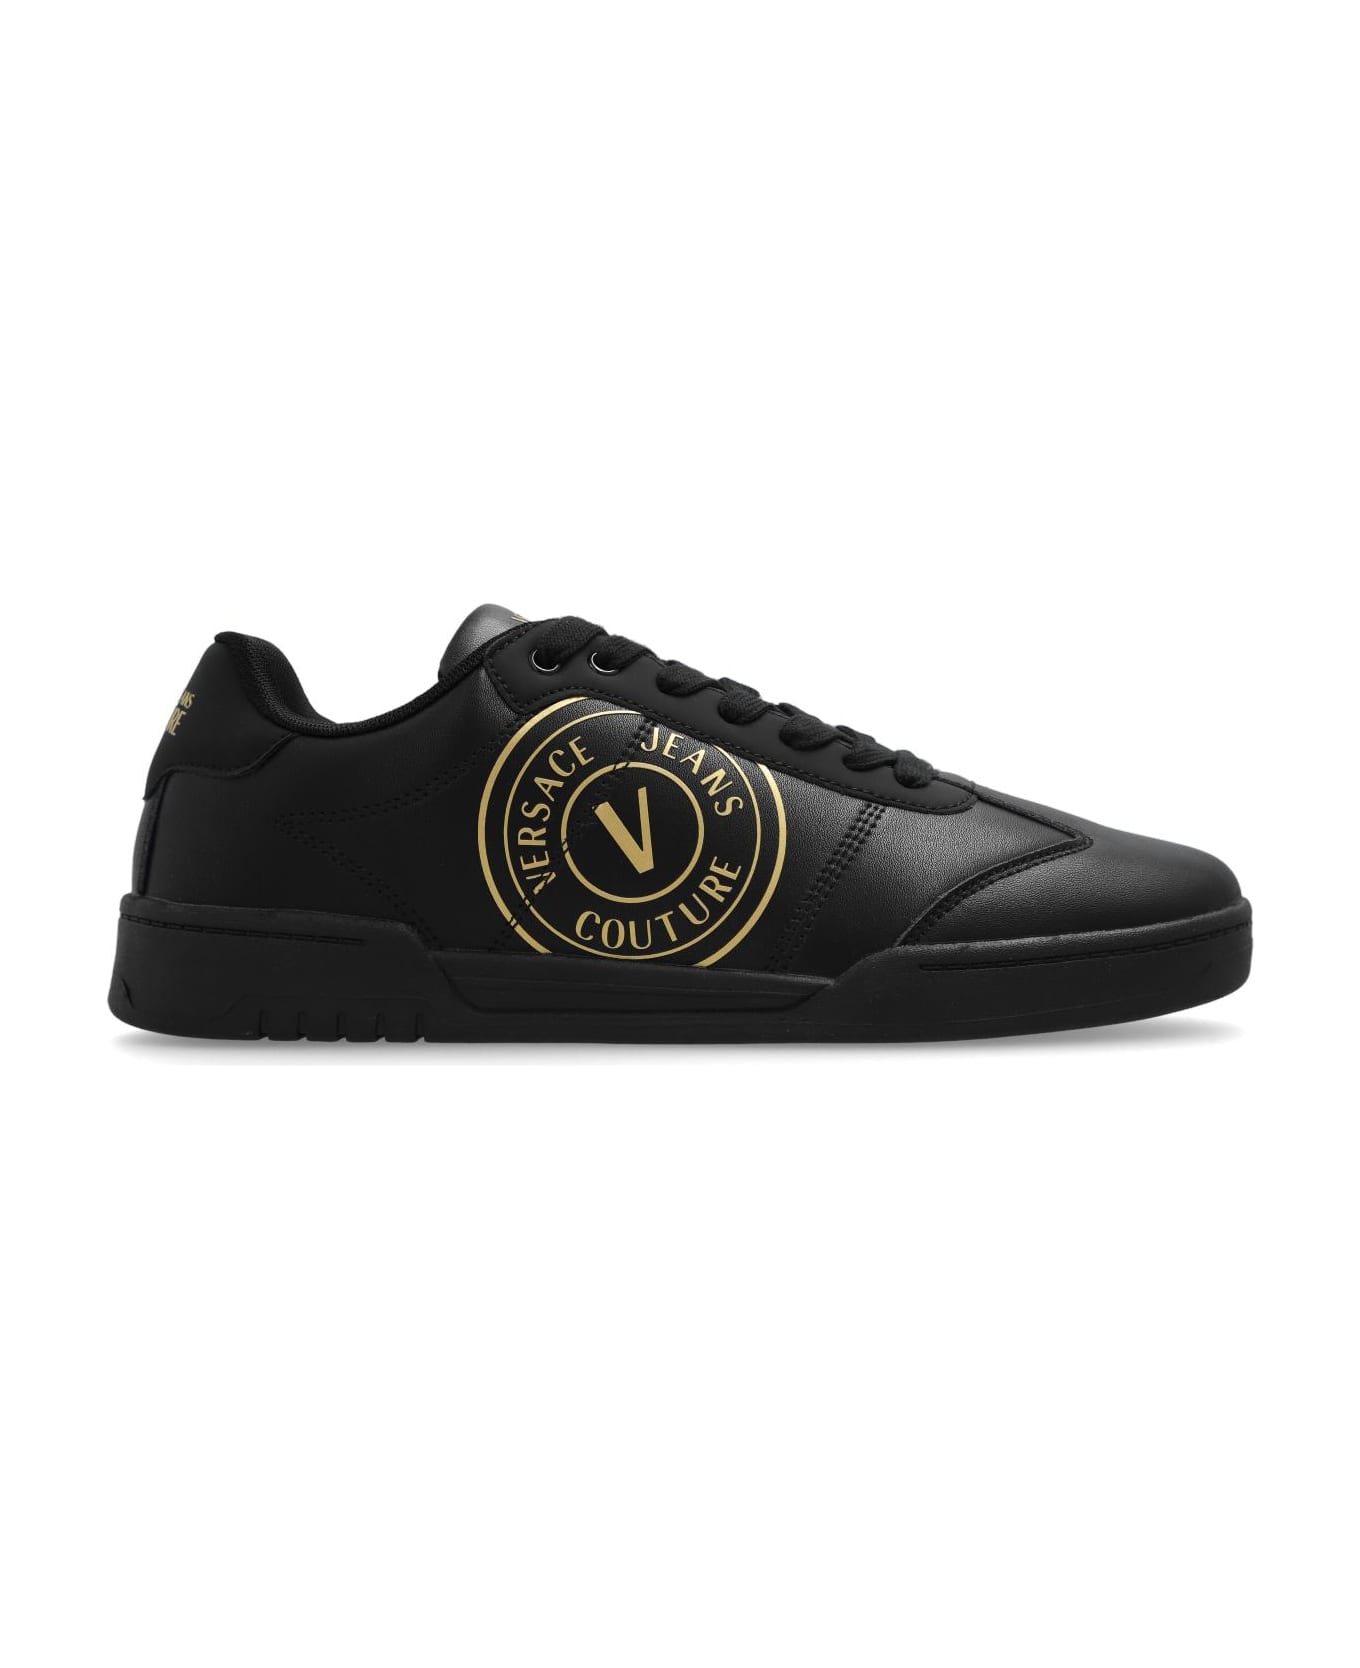 Versace Jeans Couture Fondo Brooklyn Dis. Shoes - BLACK/GOLD スニーカー